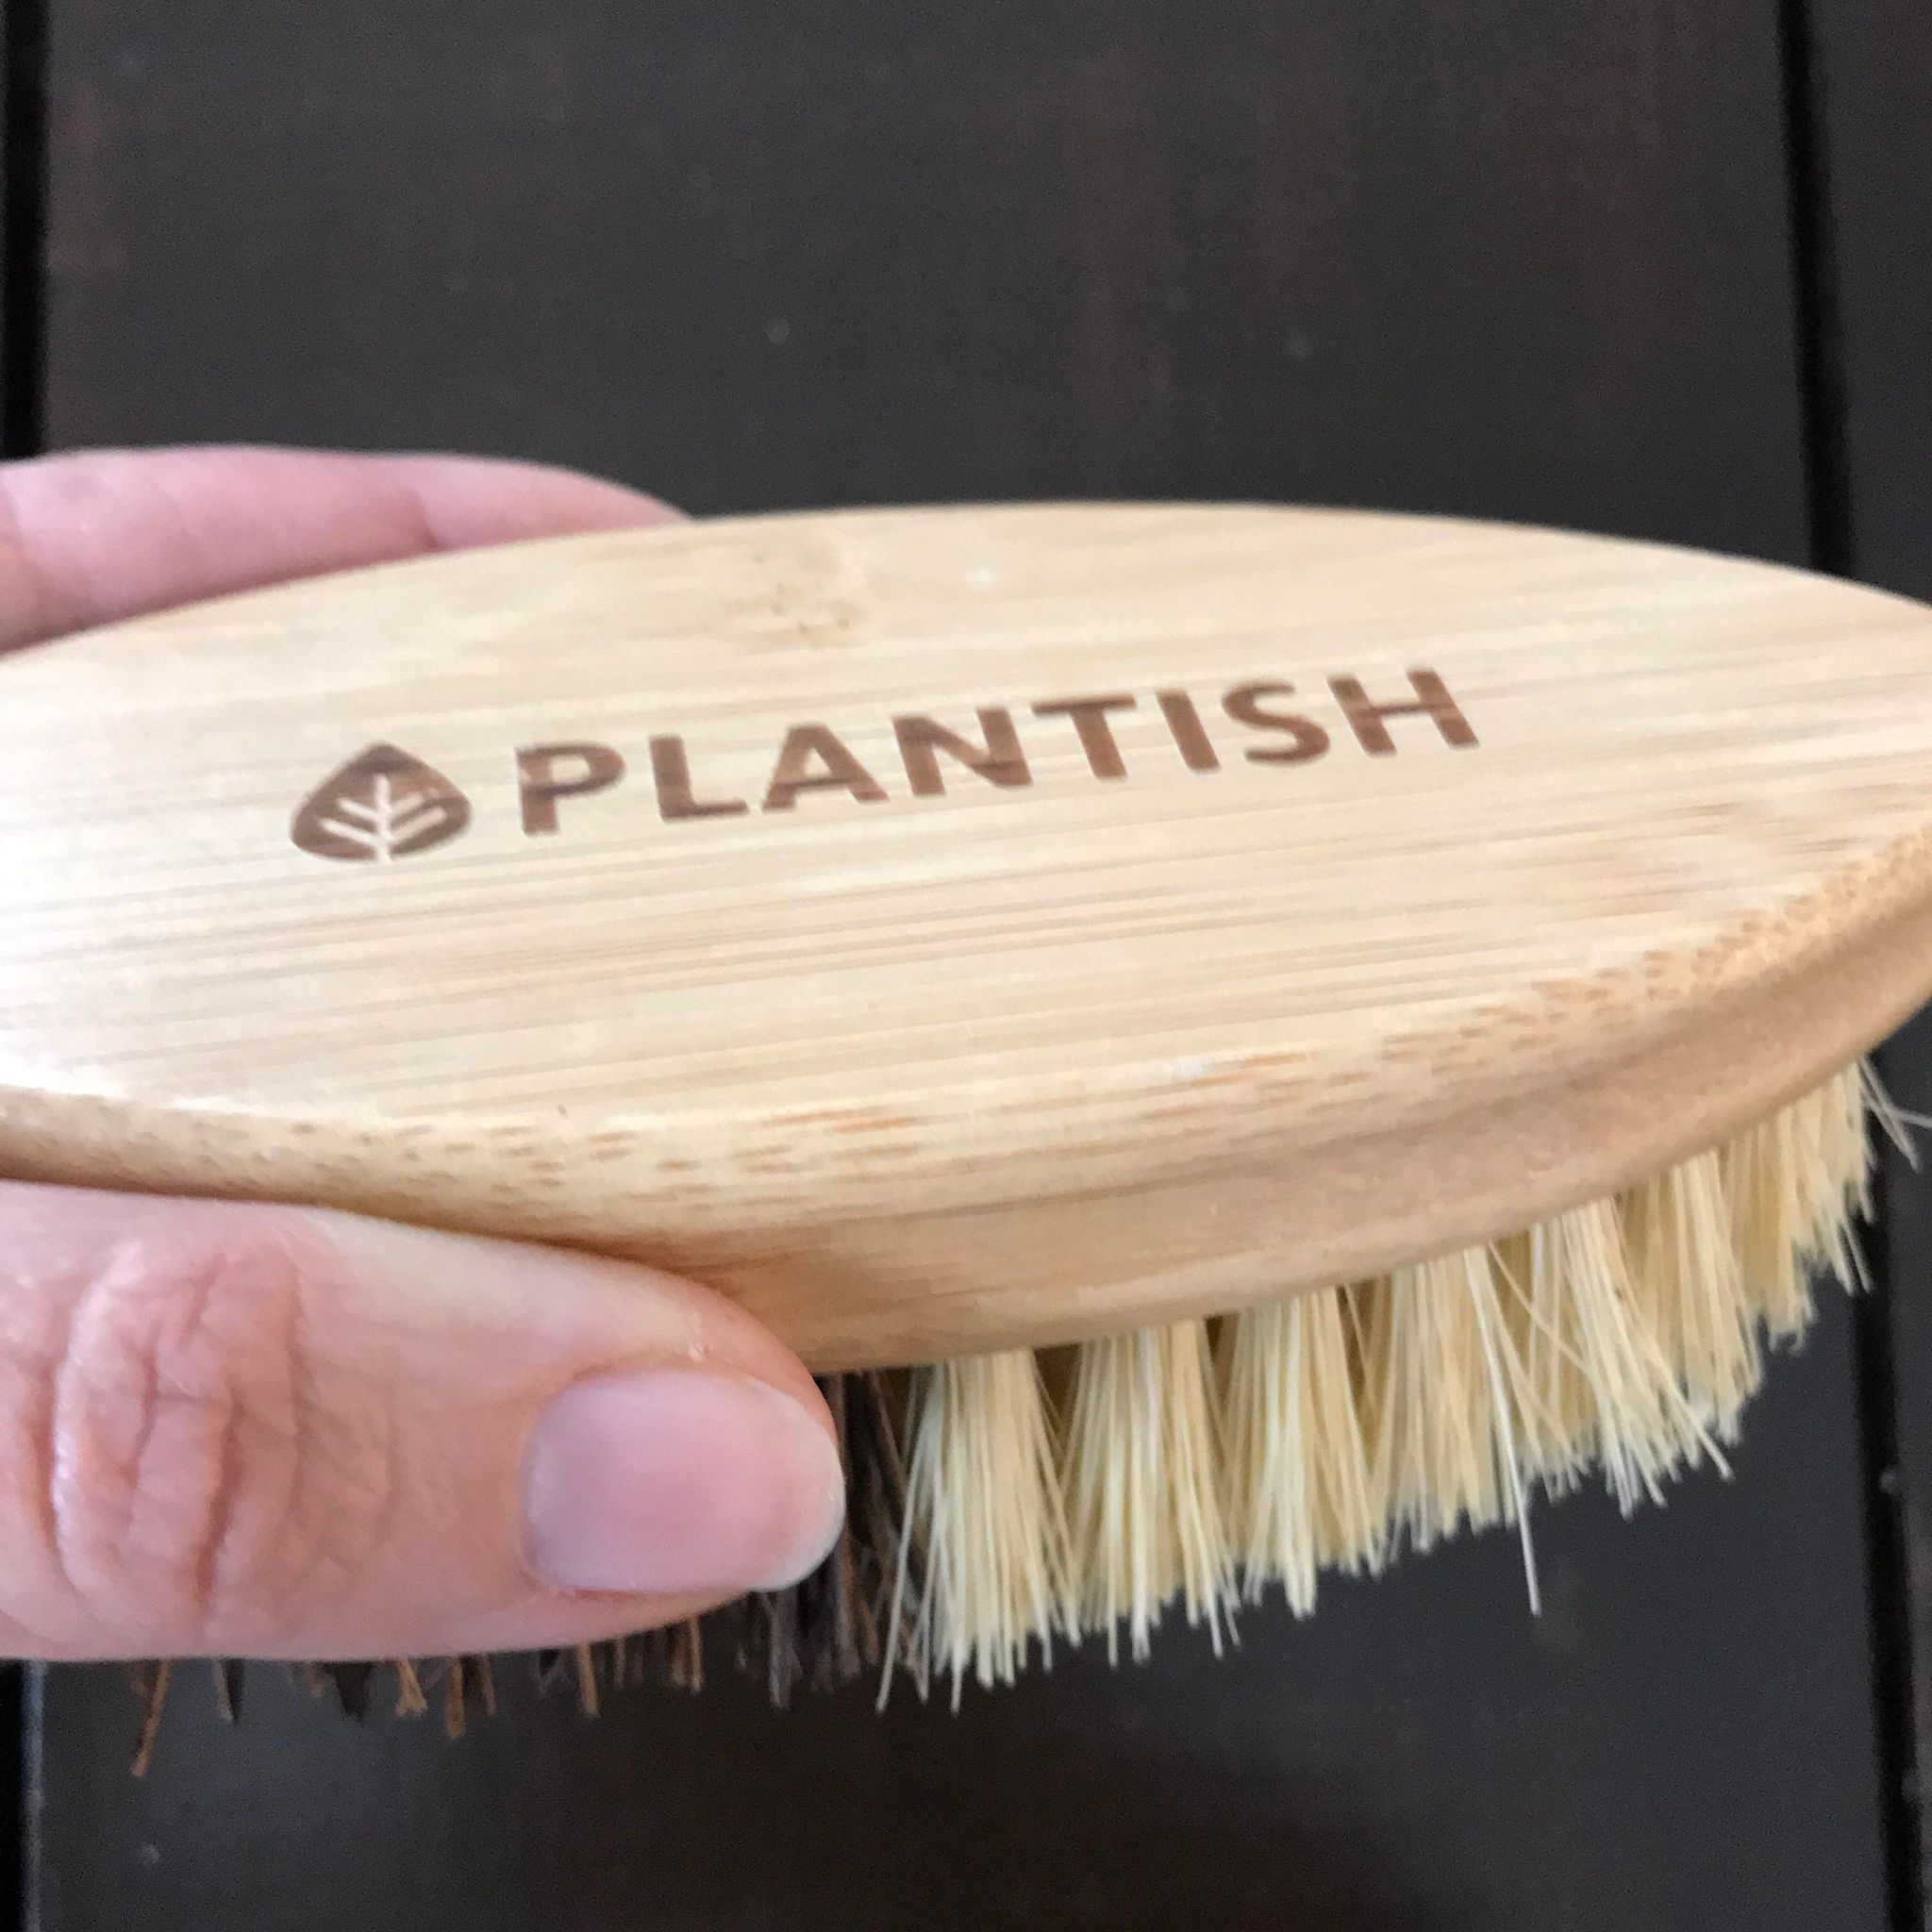 Plantish oval vegetable scrubber brush made of bamboo, sisal and palm fibres